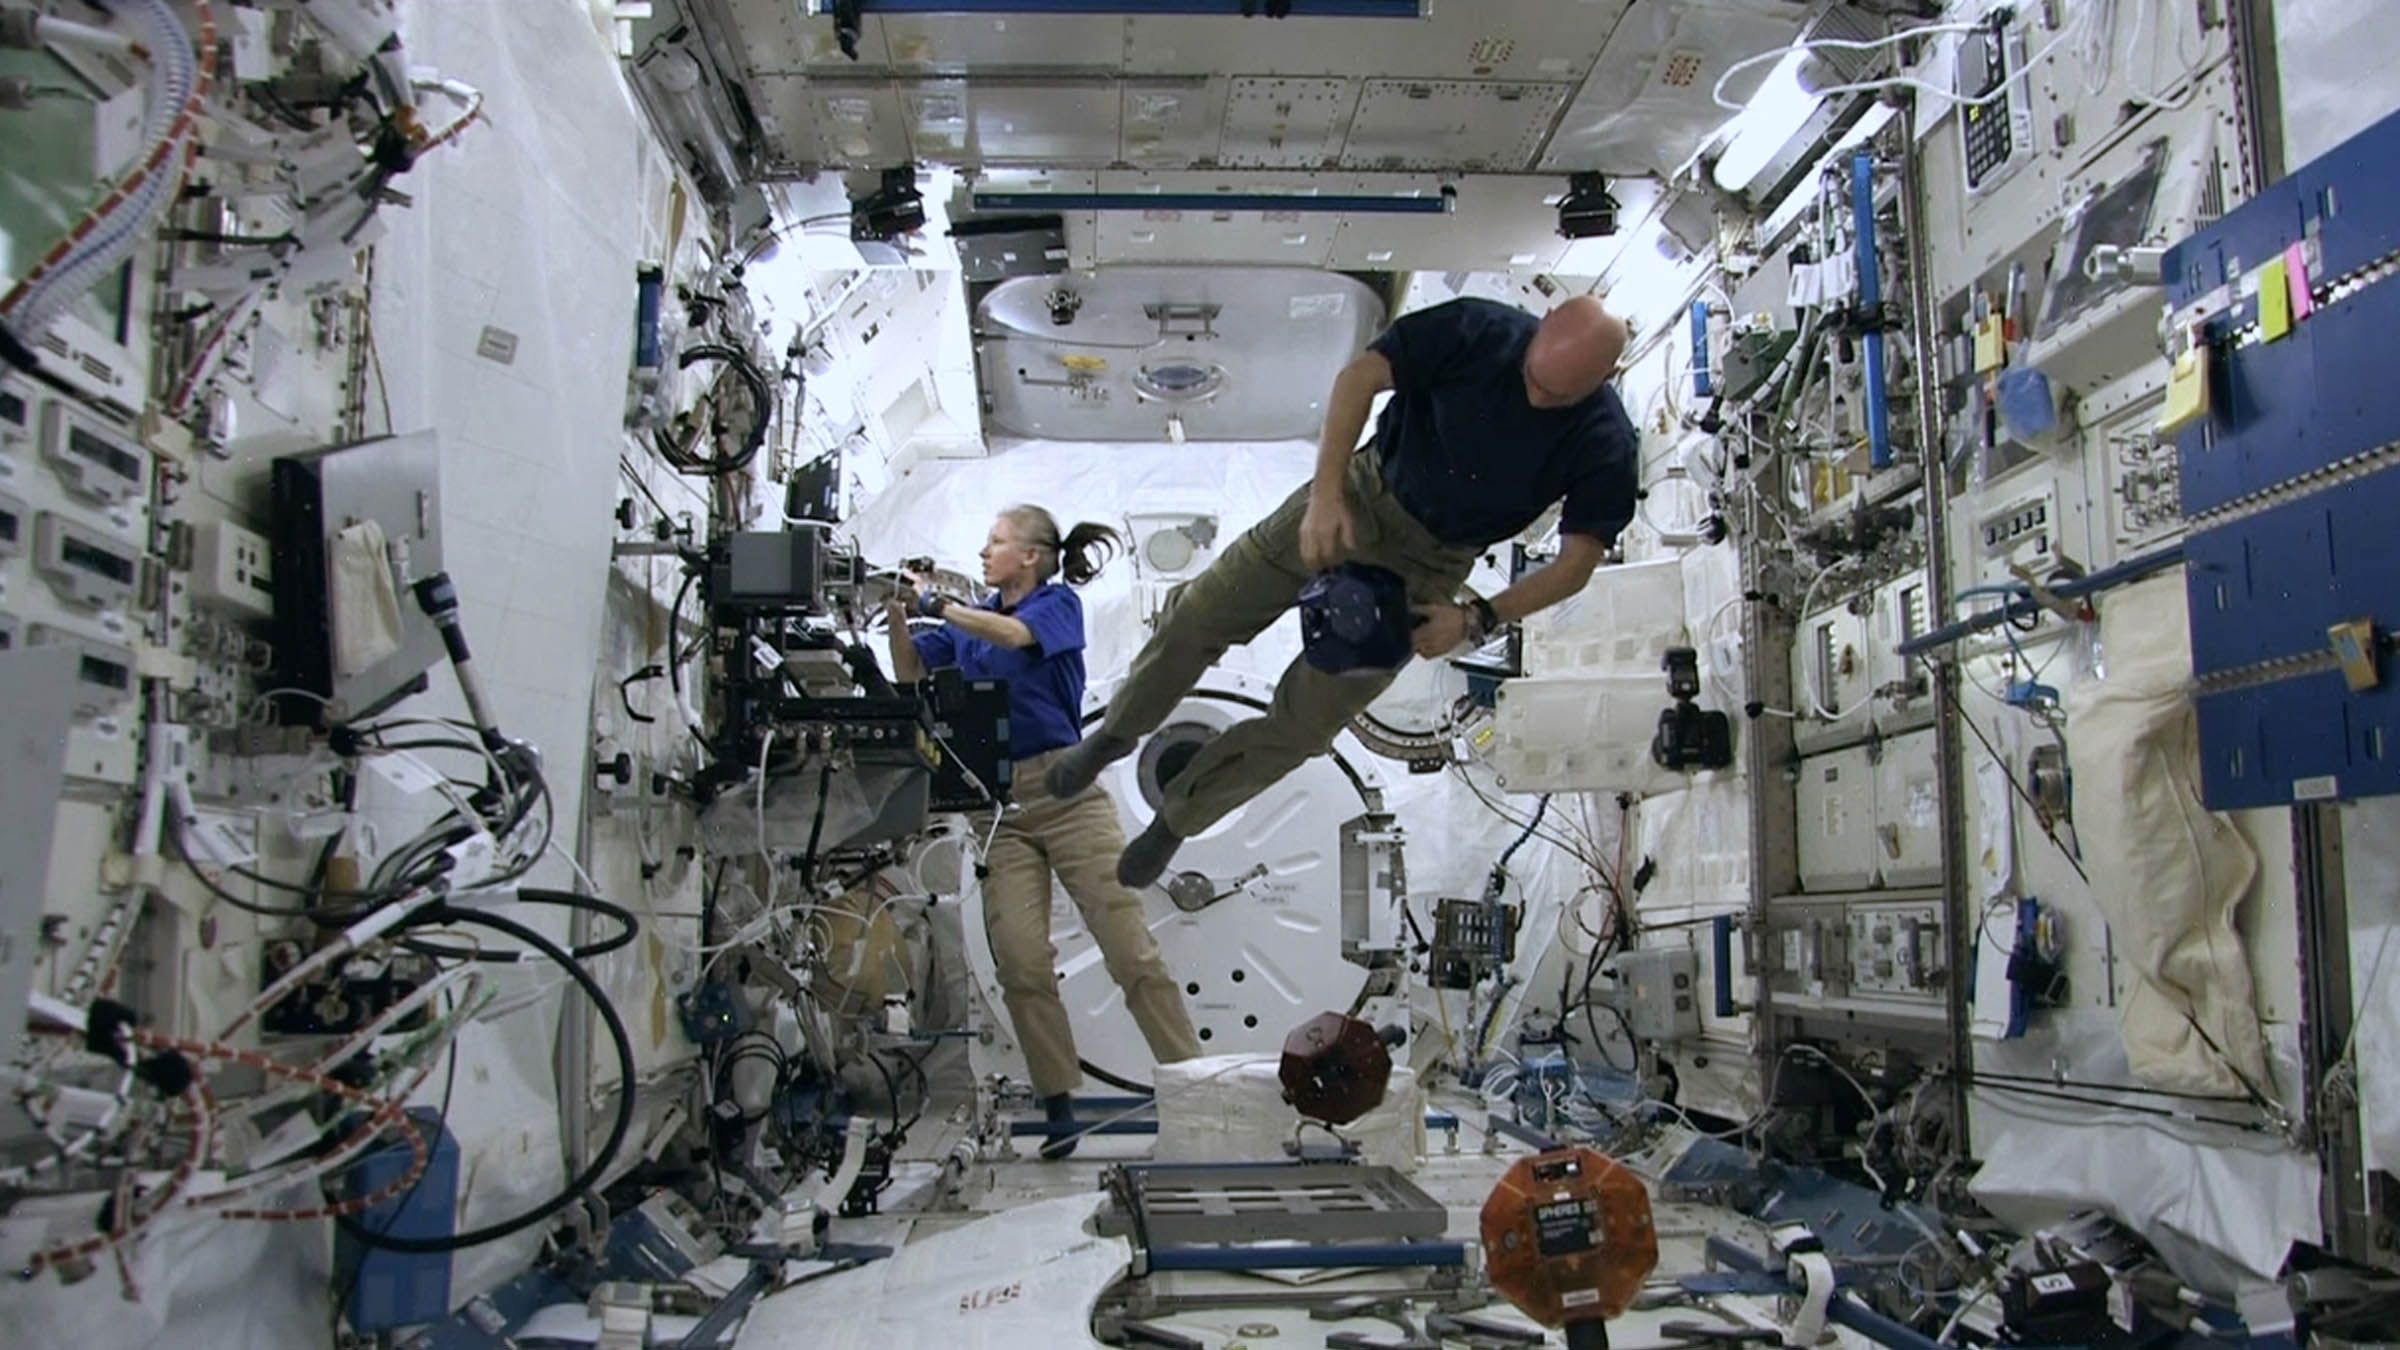 Iss 24 7 On A Space Station National Geographic For Everyone In 